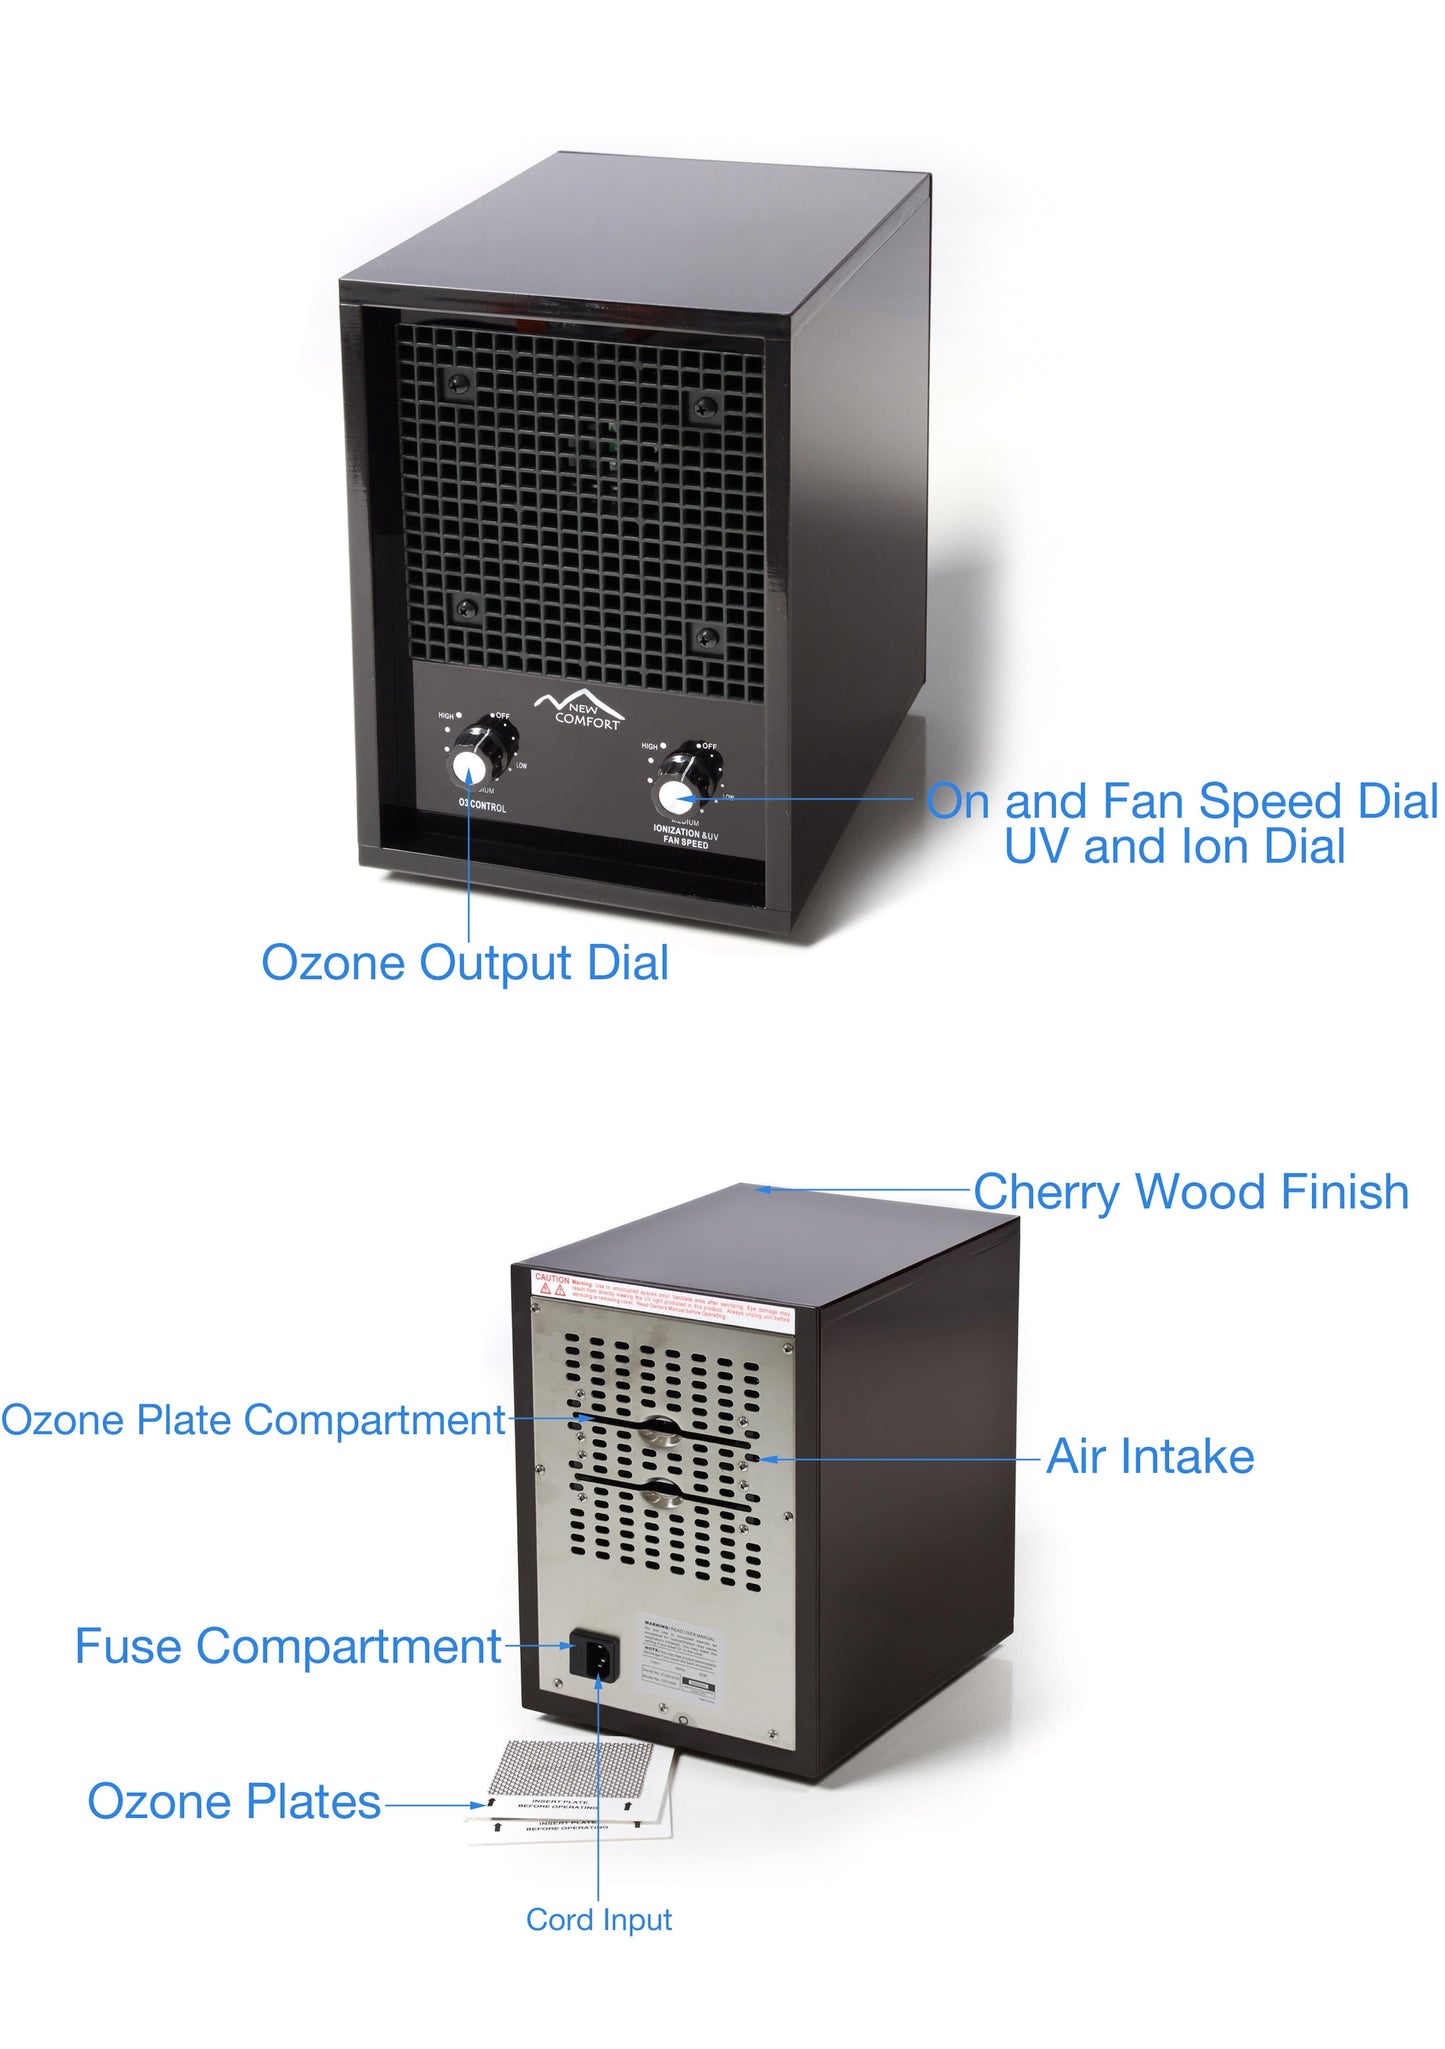 Demo Unit Save 20% Germ/Odor Eliminating Ozone Generating Air Purifier by New Comfort